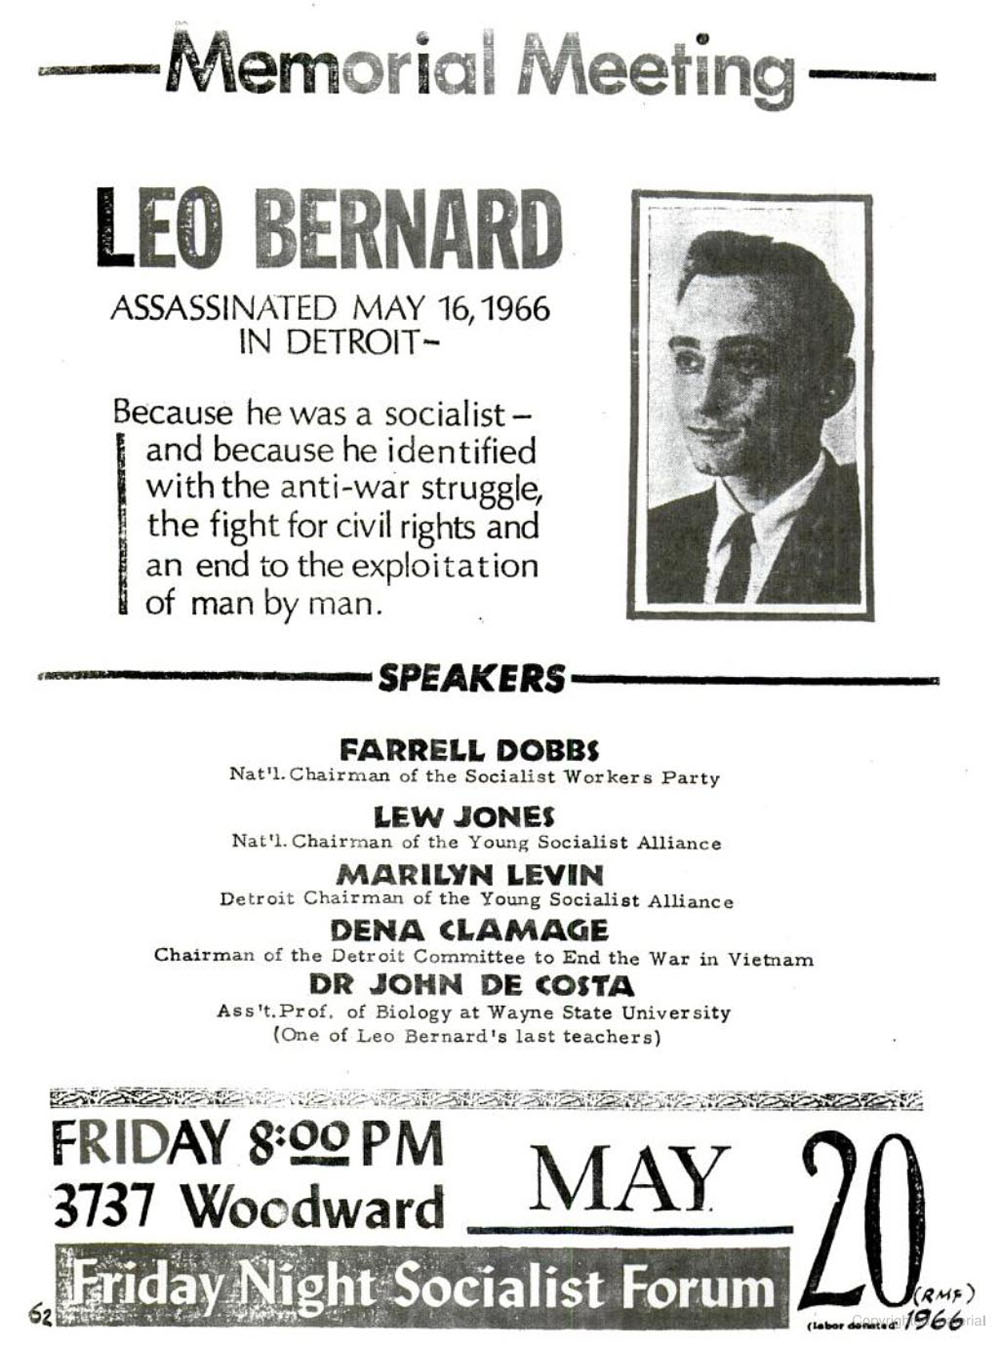 SWP poster for a Detroit memorial for Leo Bernard reading, "Because he was a socialist--and because he identified with the anti-war struggle, the fight for civil rights and the end of exploitation of man by man.